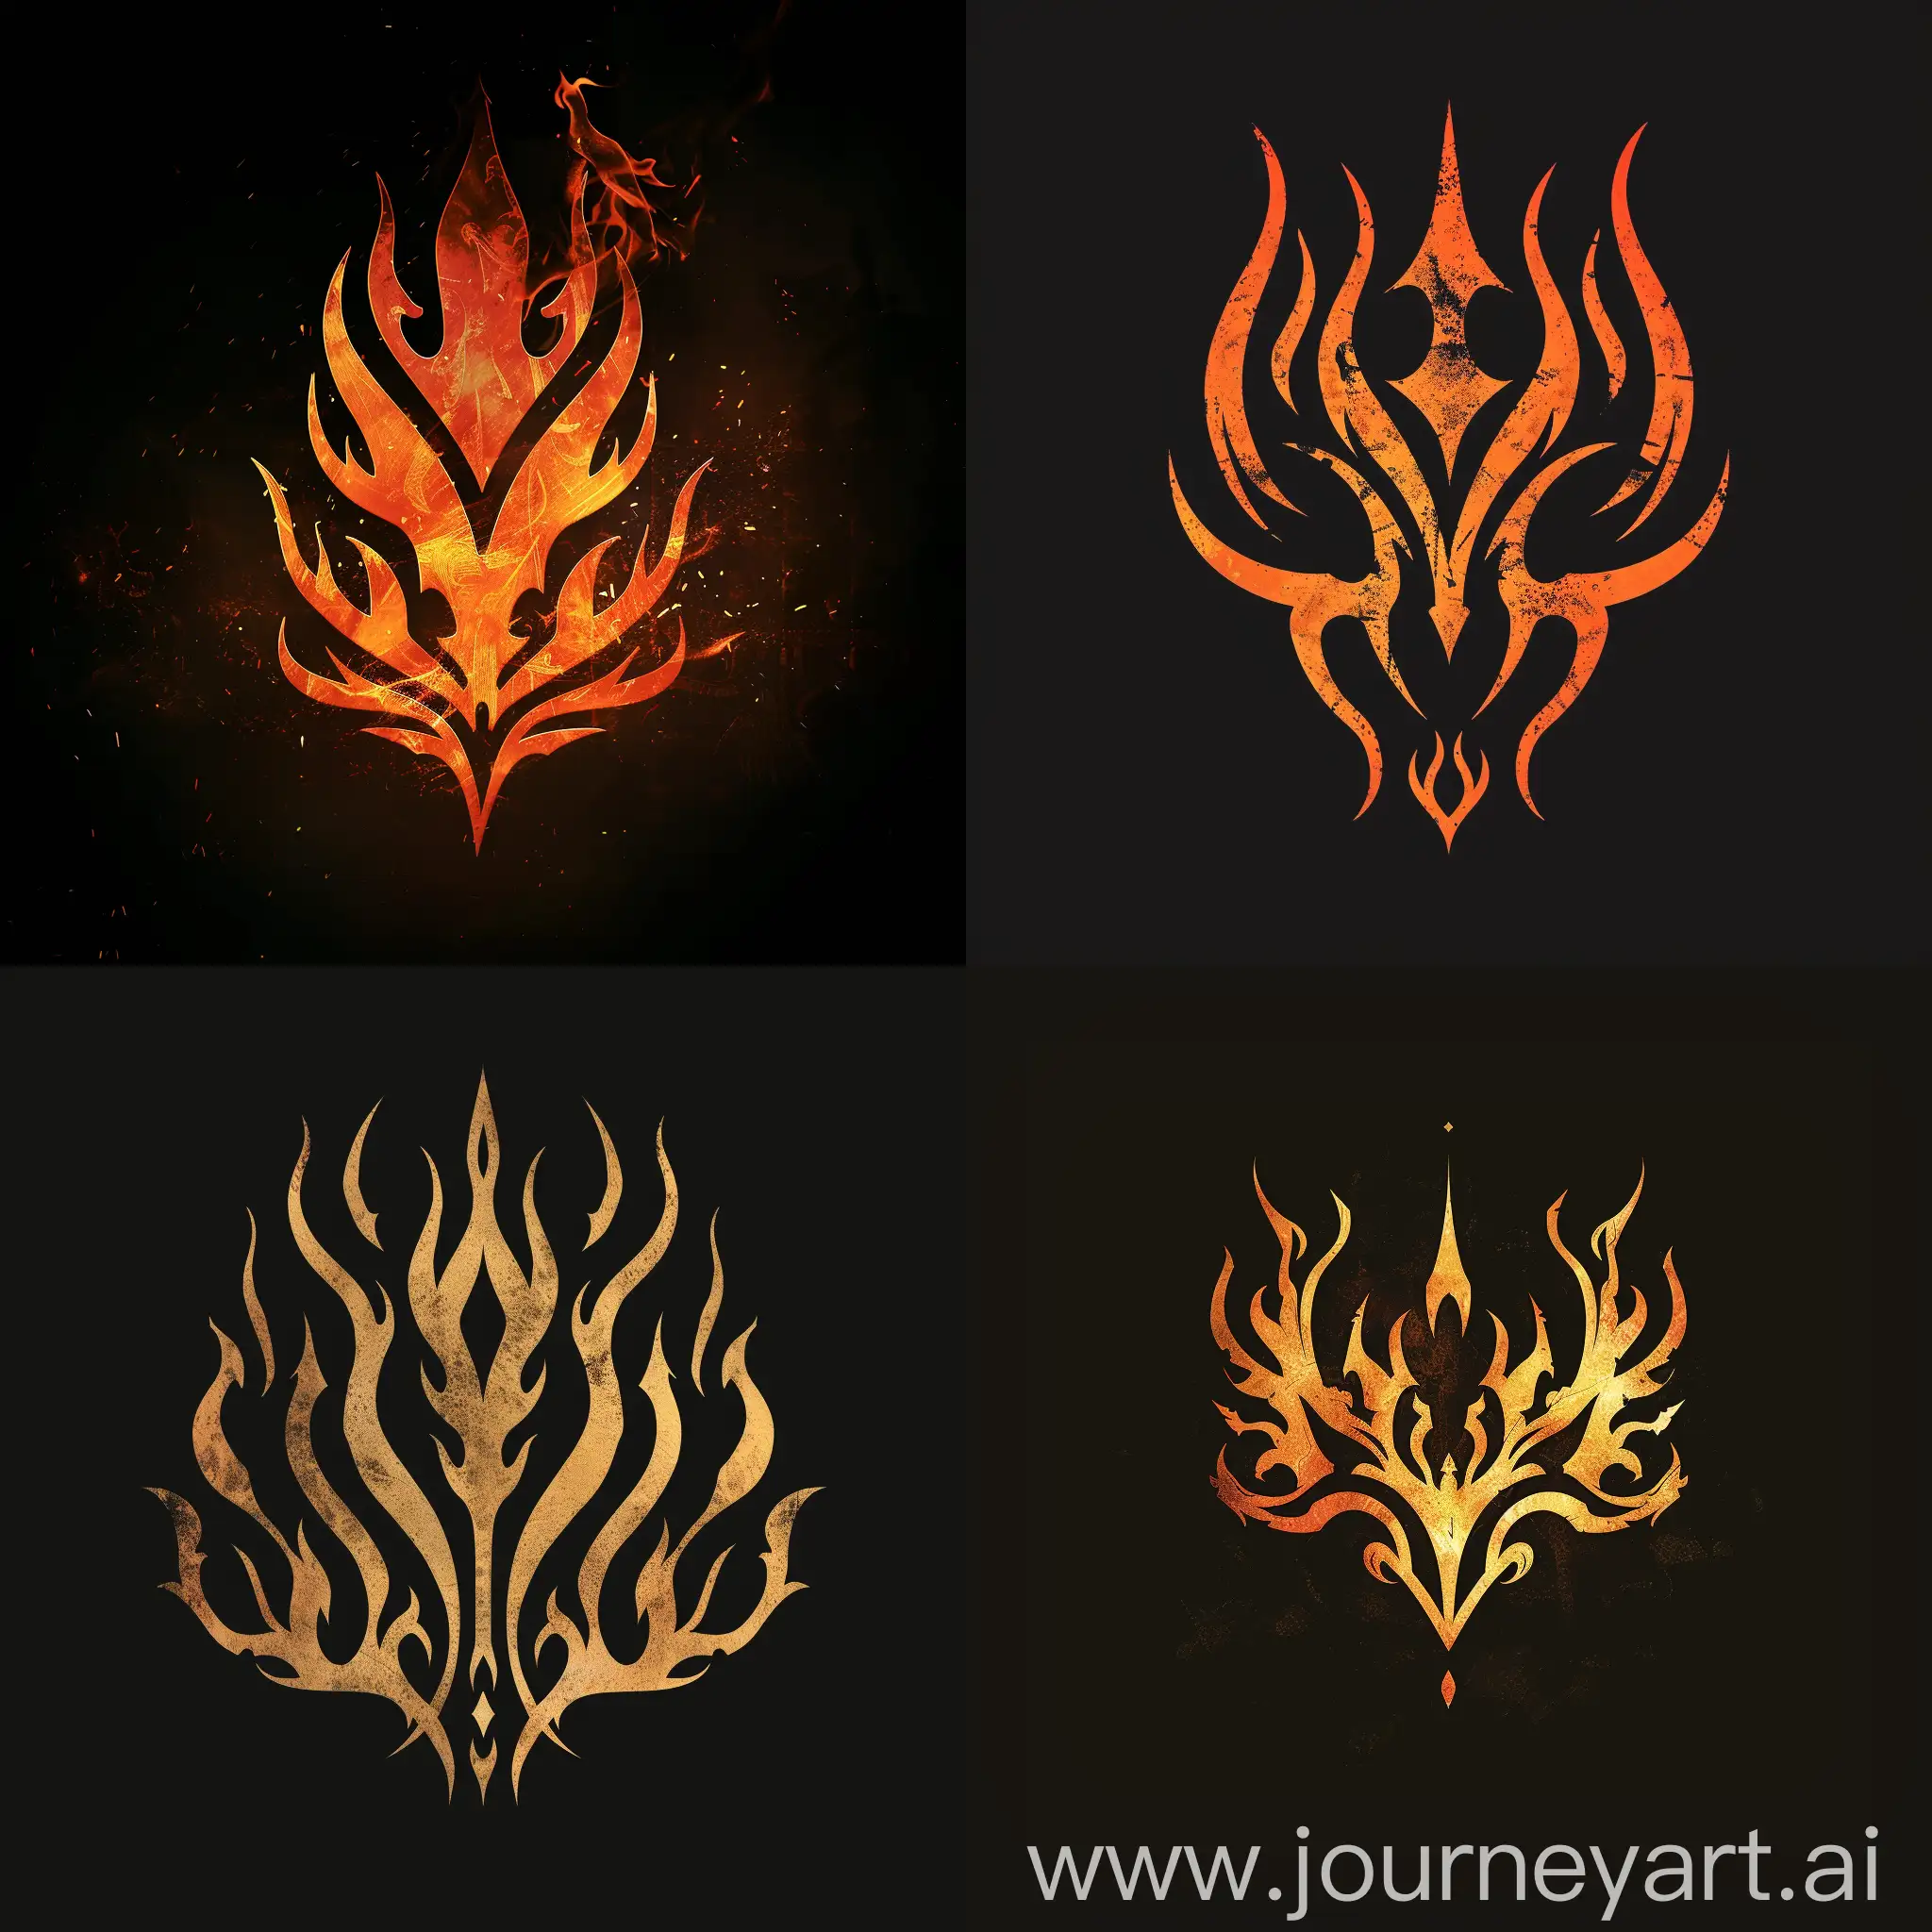 Temple-of-Doom-Alliance-Logo-with-Fiery-Flames